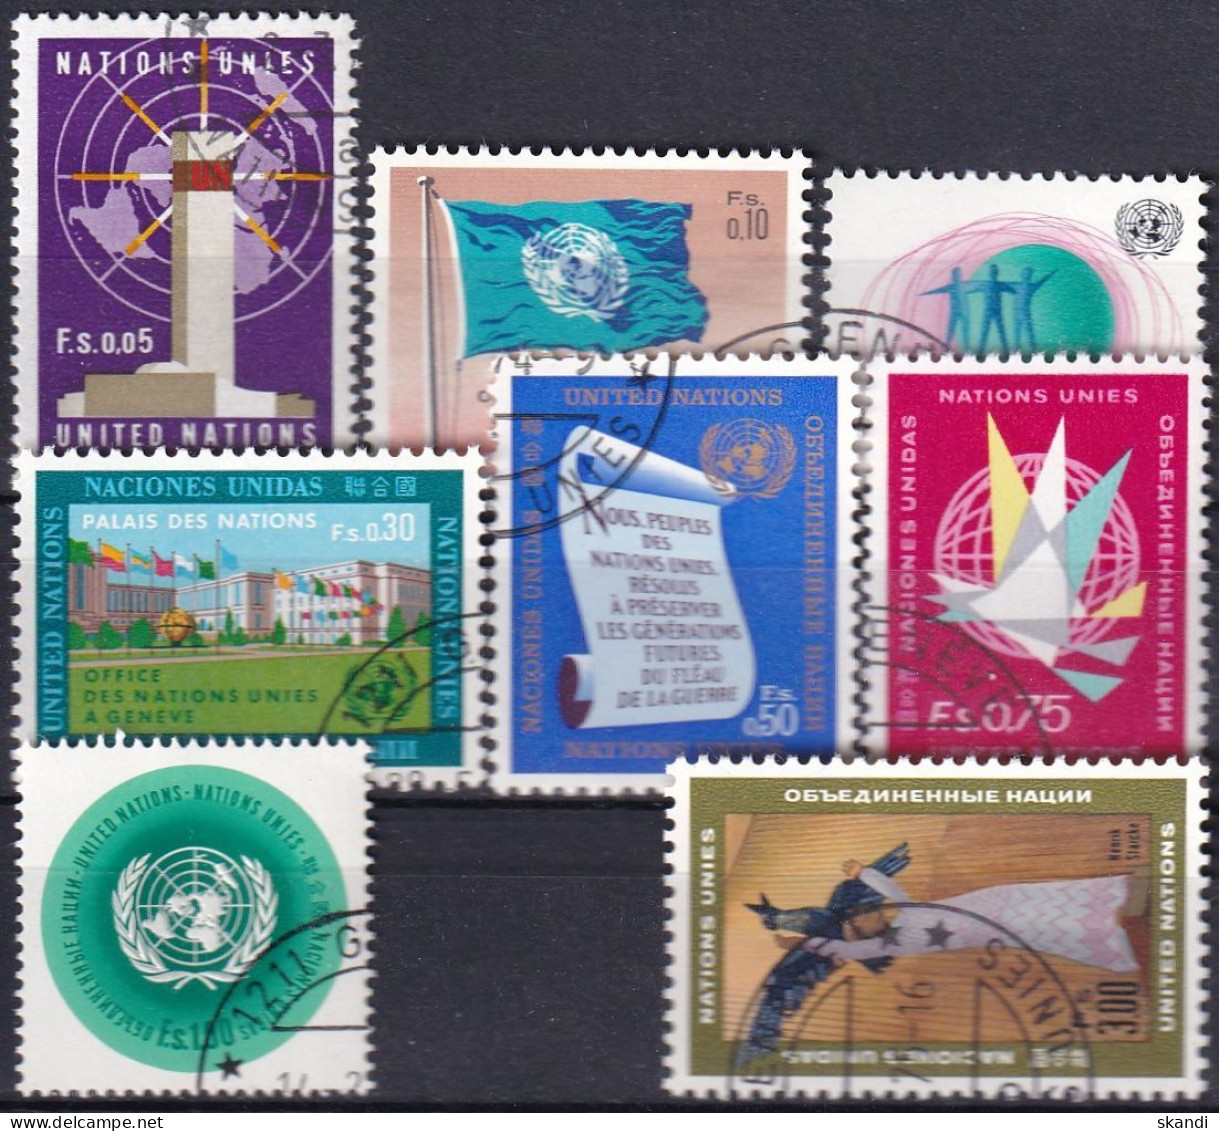 UNO GENF 1969 Mi-Nr. 1-8 Kompletter Jahrgang/complete Year Set O Used - Aus Abo - Used Stamps